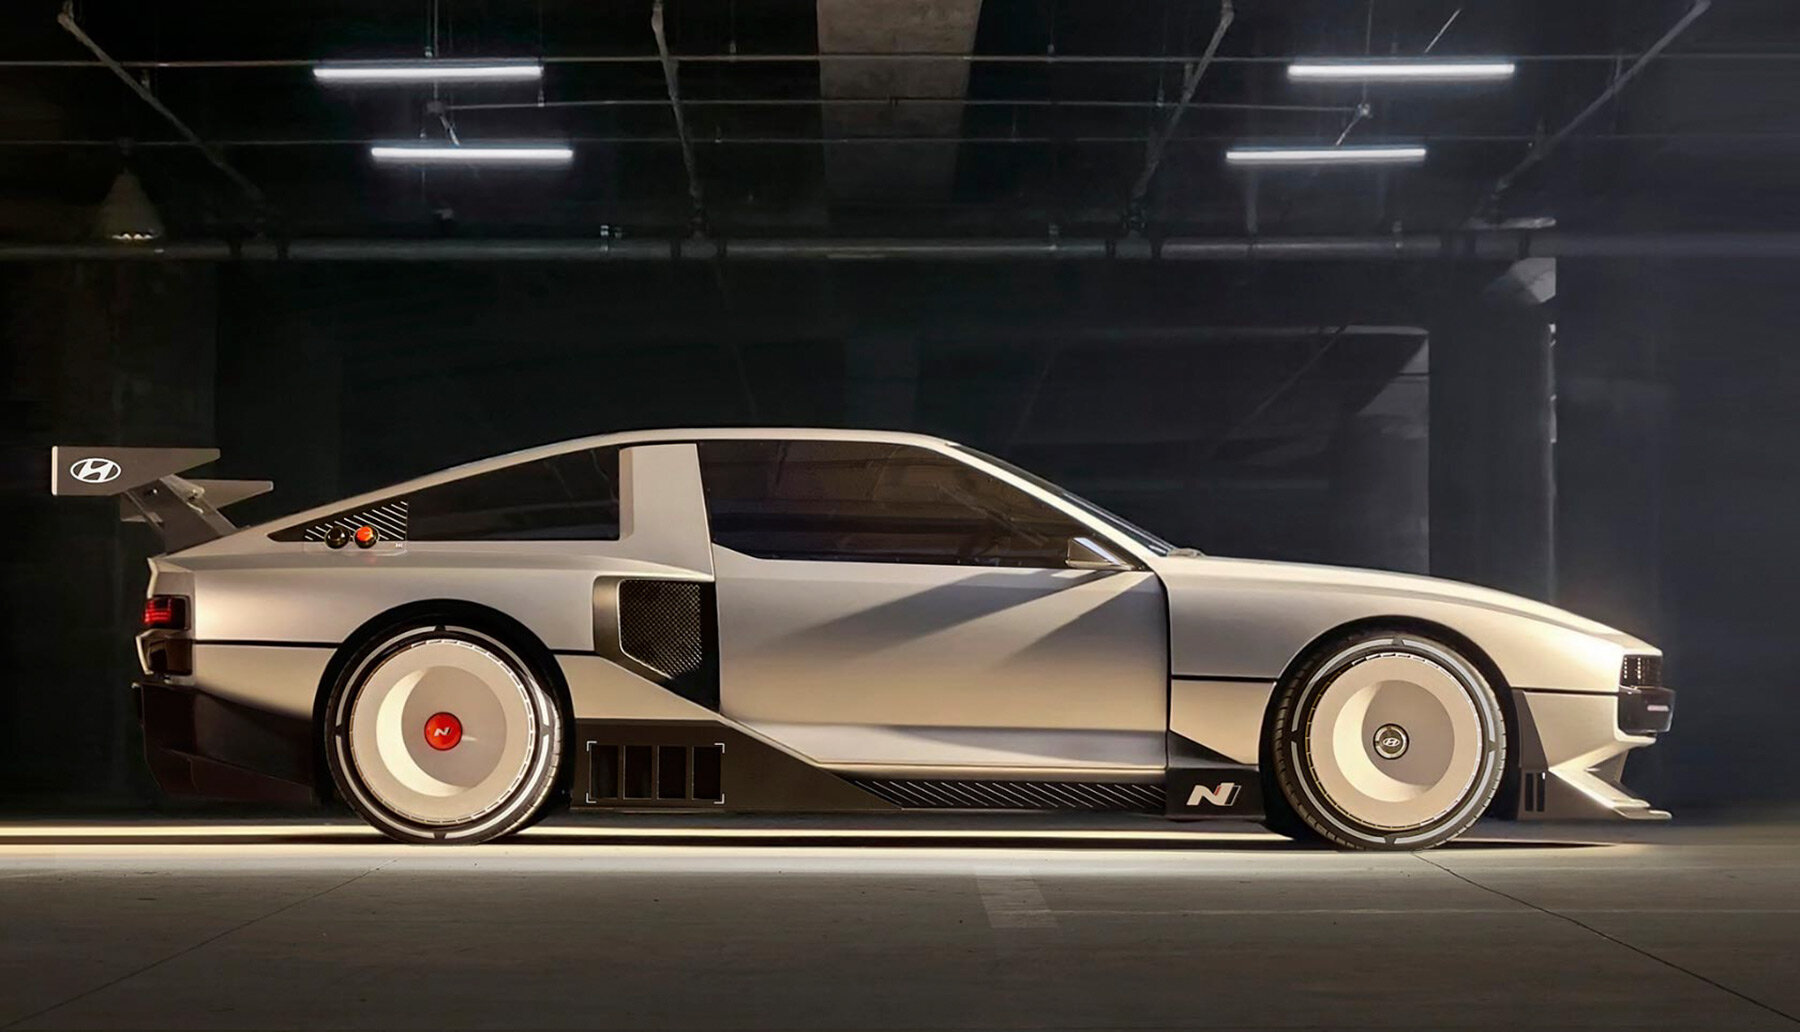 hyundai unveils latest 'N vision 74' rolling lab concept with cyberpunk ...